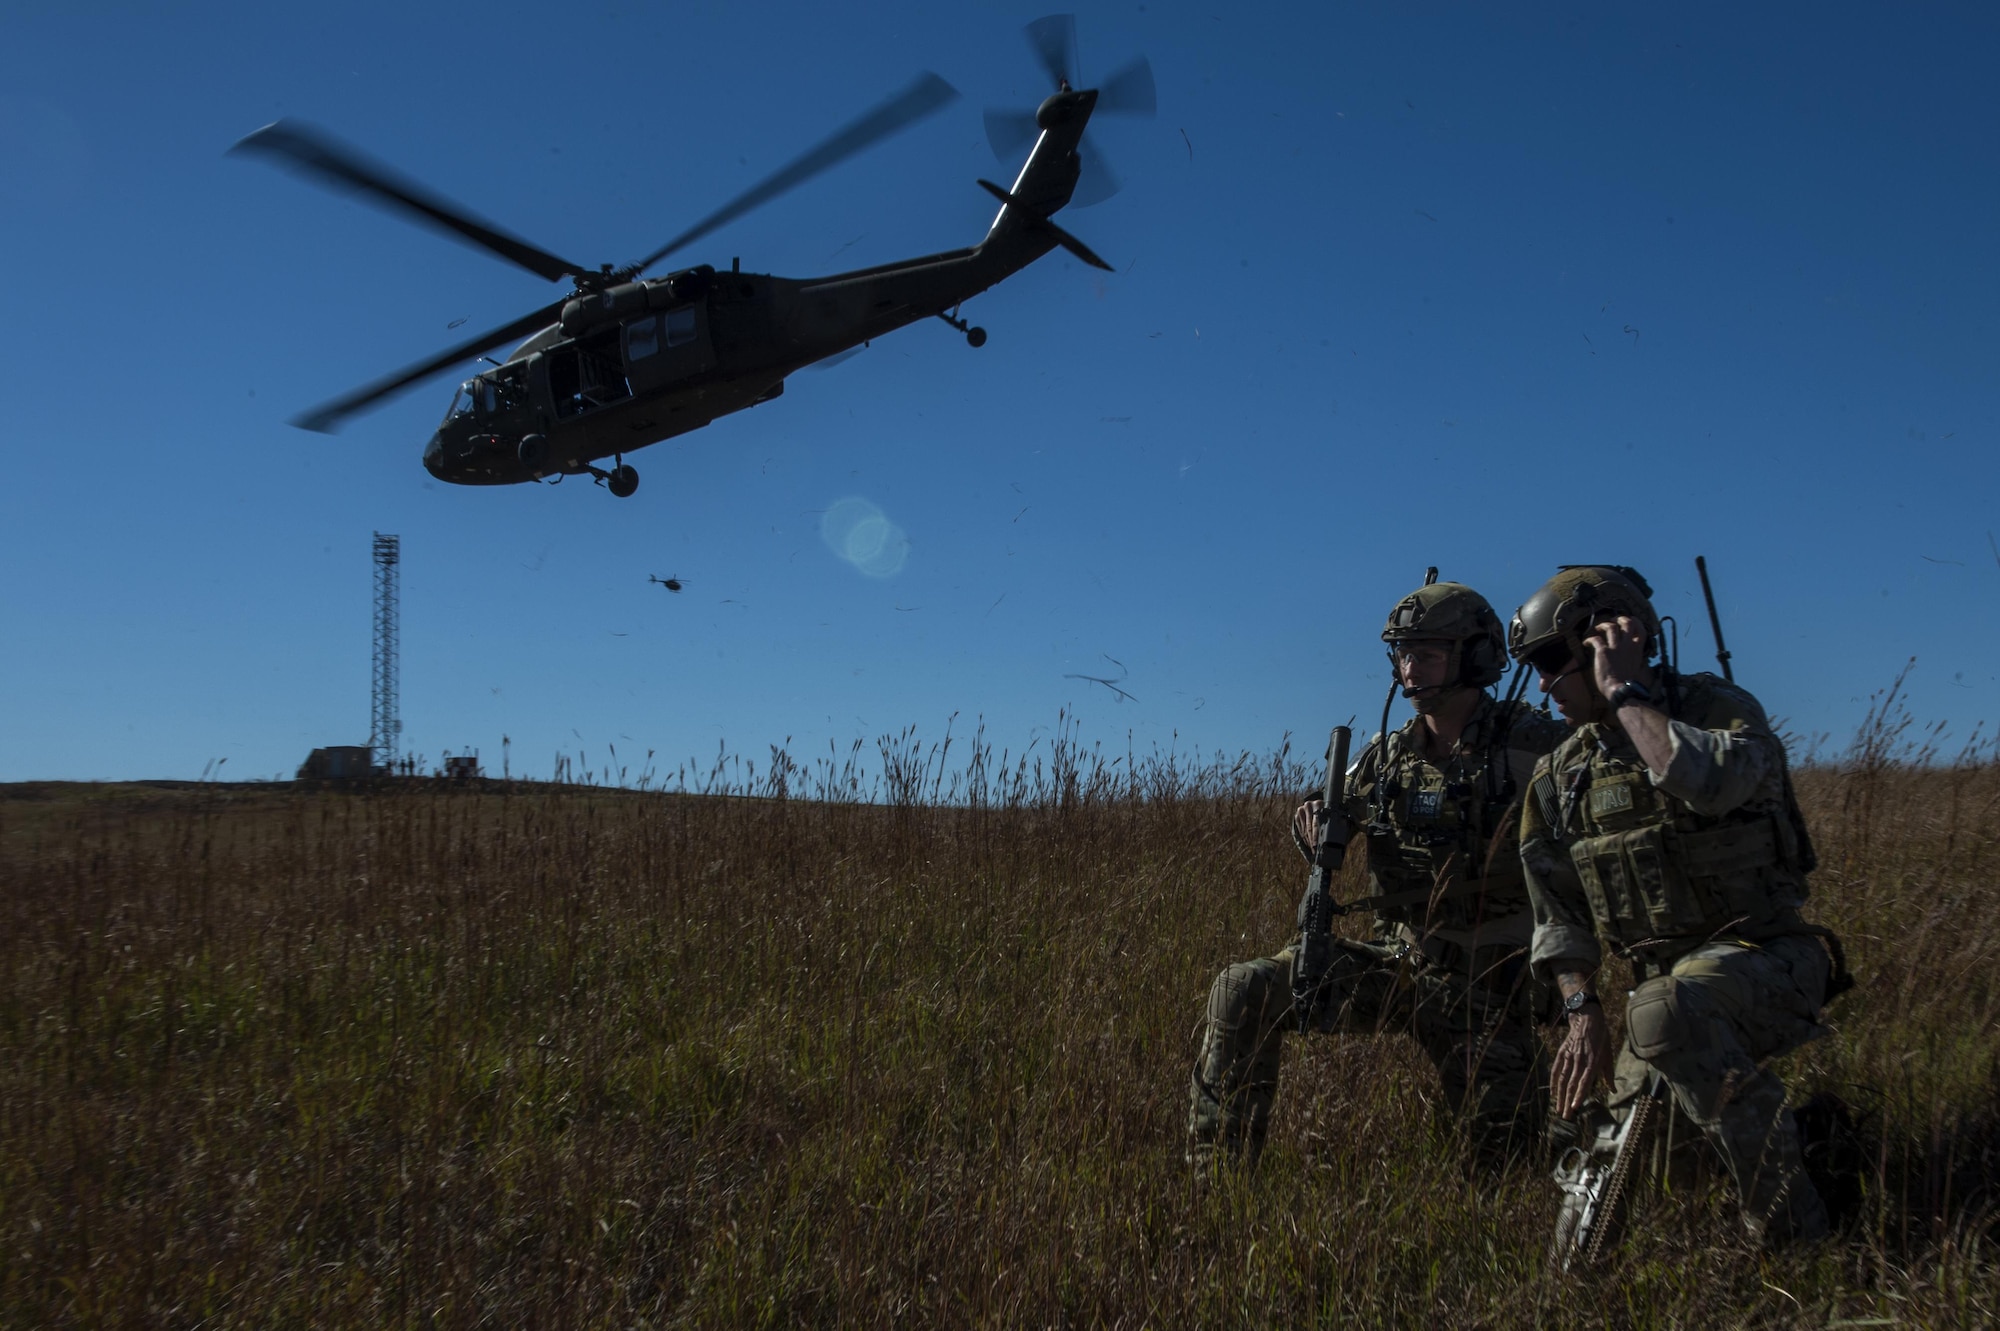 U.S. Air Force Airmen from the 17 Special Tactics Squadron out of Fort Benning, Georgia, control airspace operations, during Exercise Jaded Thunder Oct. 29, 2014 in Salina, Kansas. Joint special operations forces, including the U.S. Air Force's 17th Special Tactics Squadron, are training together in Exercise Jaded Thunder to ensure high proficiency for deployment requirements. The 17th STS of the 24th Special Operations Wing provides precision air strikes for join ground special operation forces. (U.S. Air Force photo by Senior Airman James Richardson)(Not Reviewed)